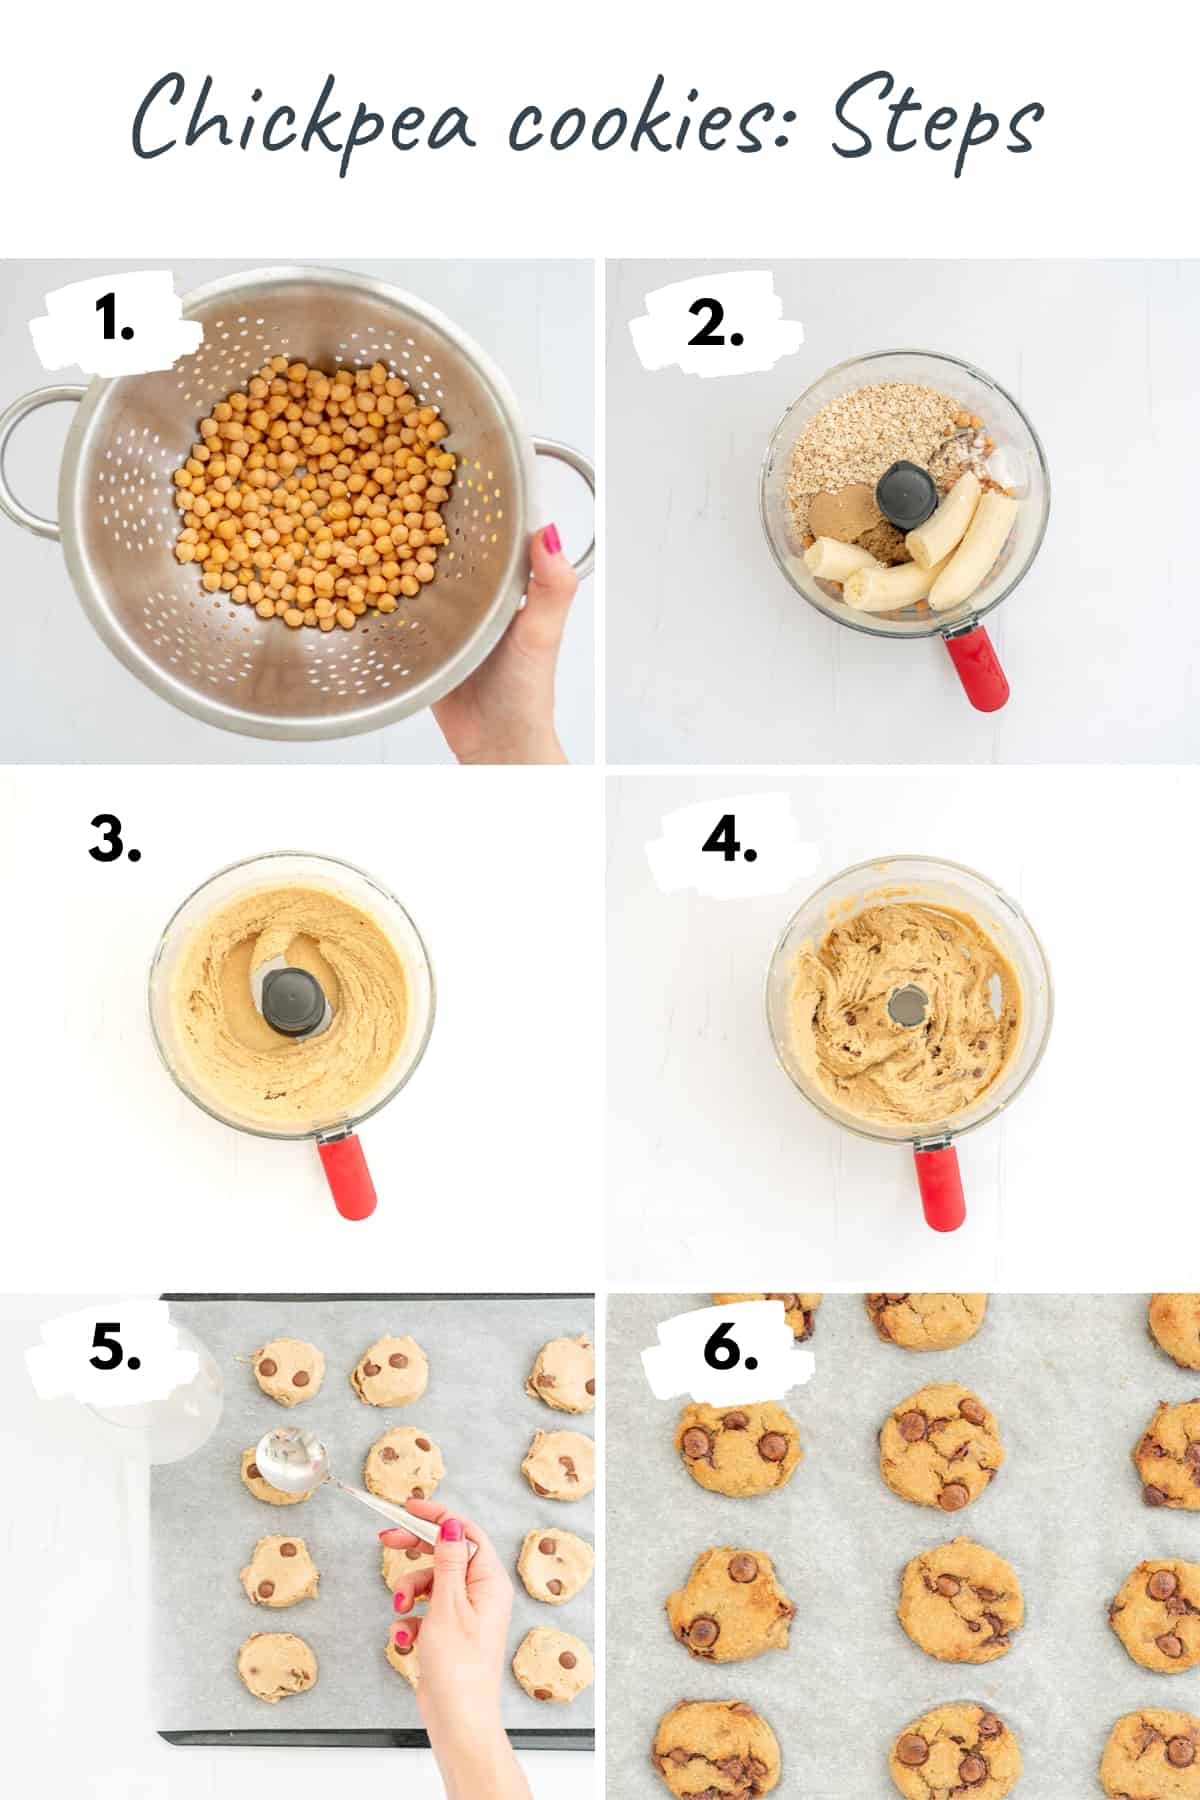 6 image photo collage showing the key steps to making chickpea cookies